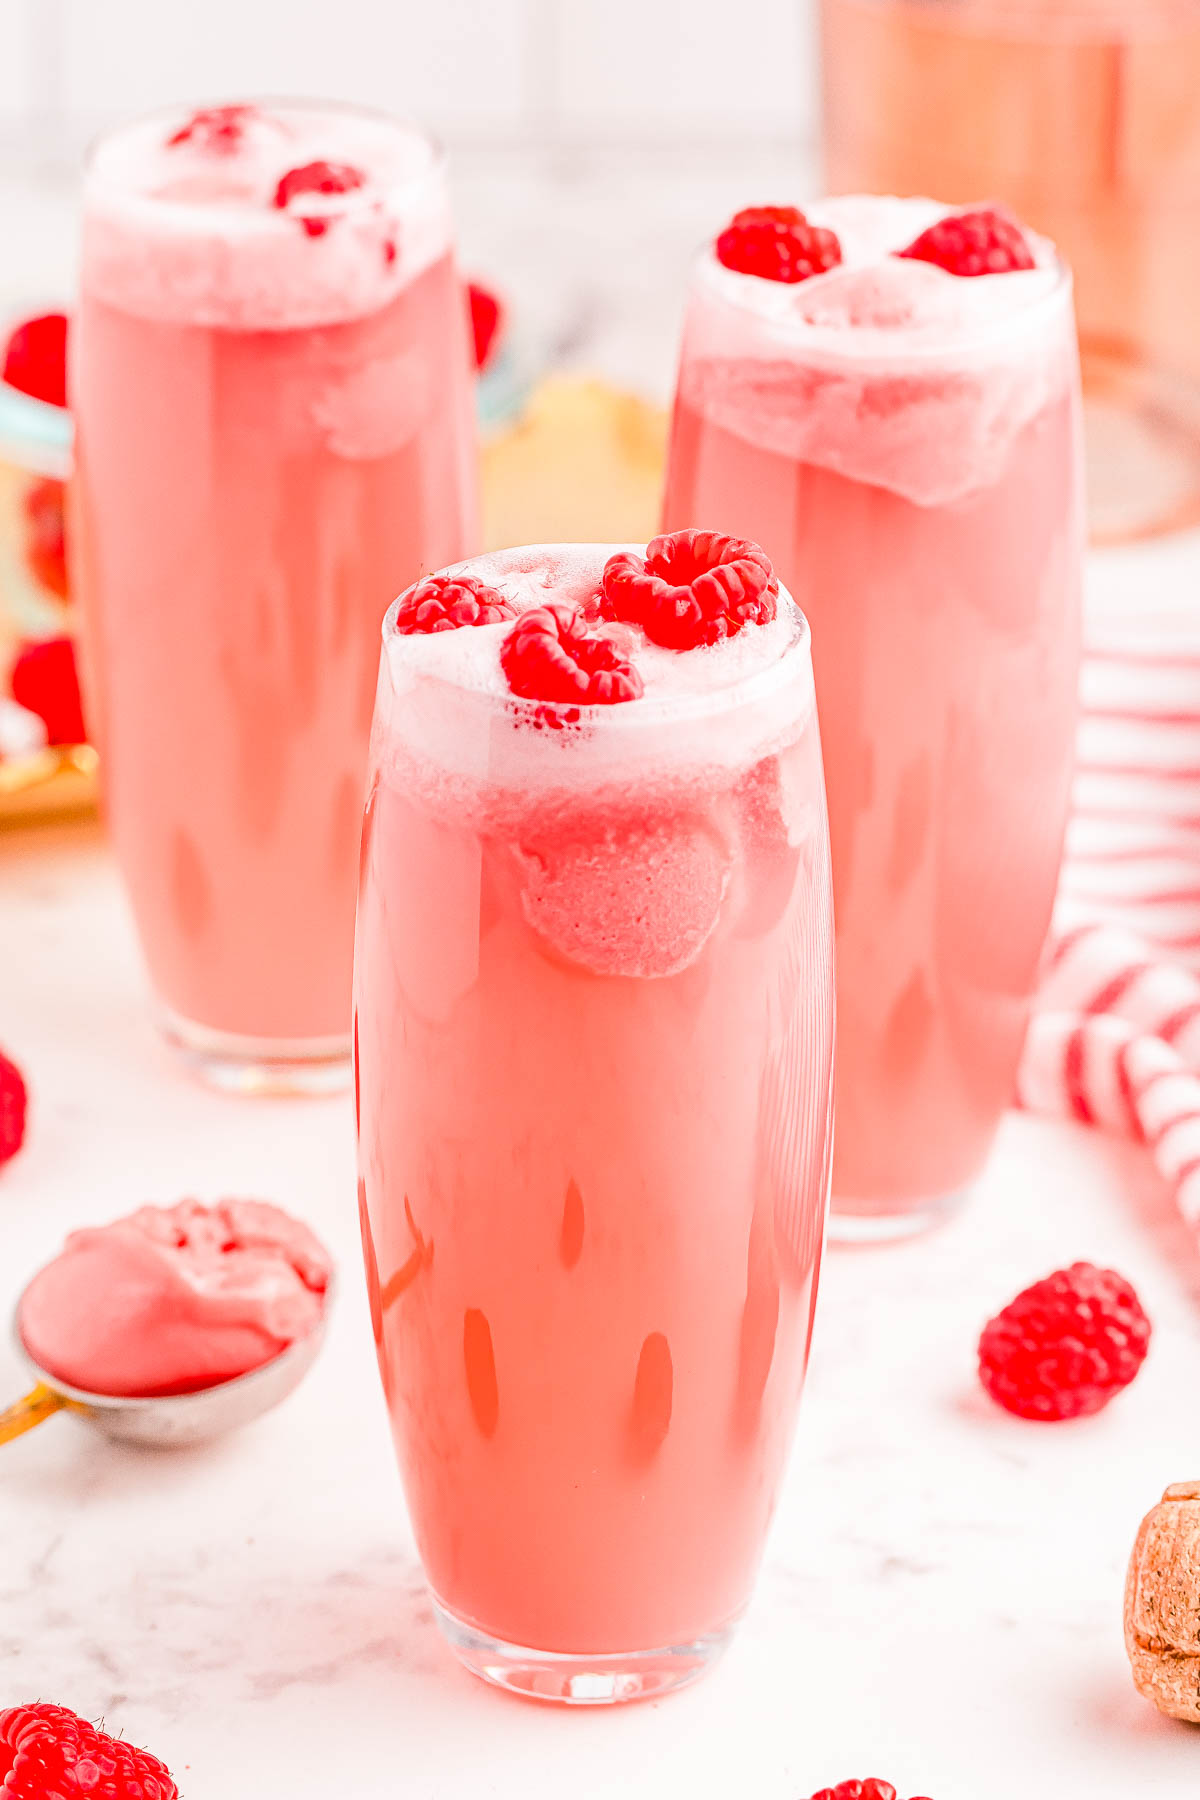 Three tall glasses of pink punch topped with raspberries and foam, surrounded by scattered raspberries and a spoonful of pink sorbet on a white counter.